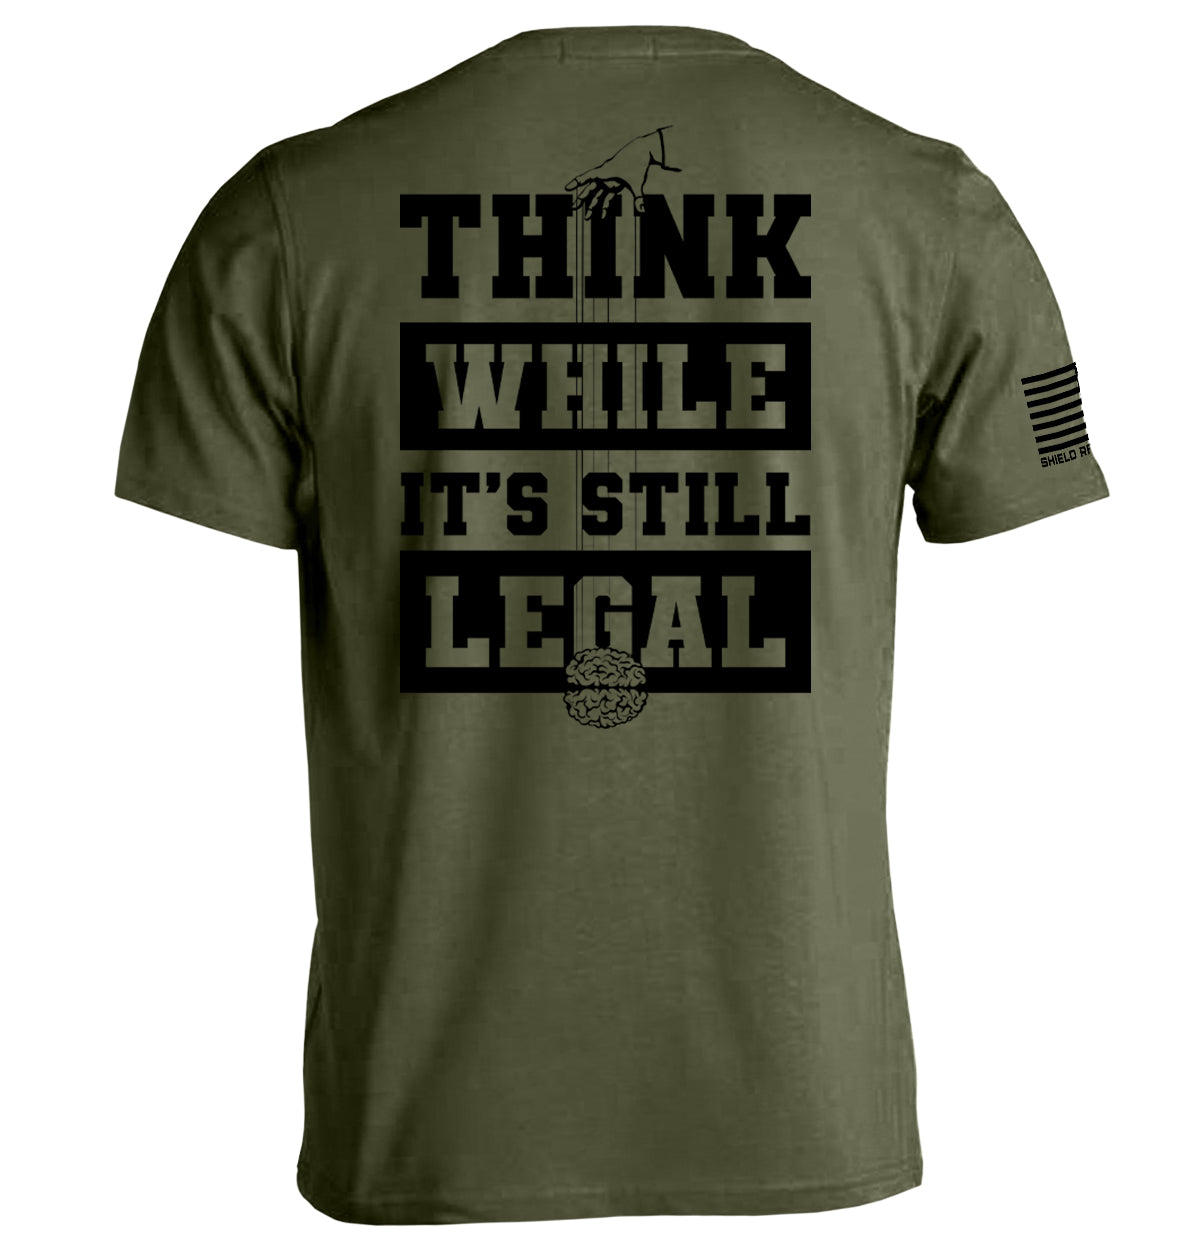 Think While it's still Legal